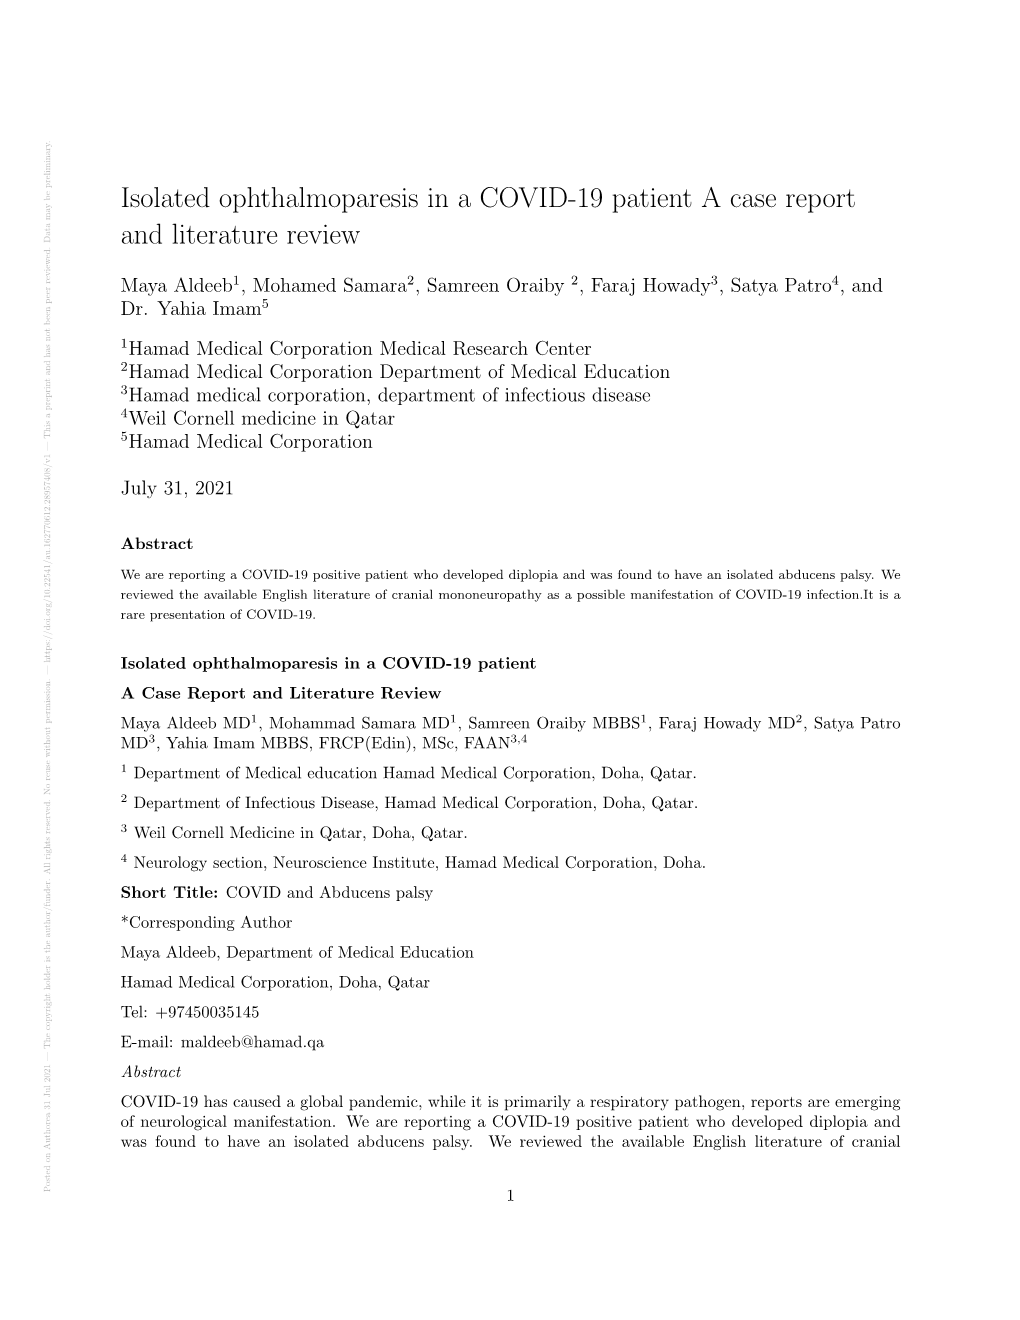 Isolated Ophthalmoparesis in a COVID-19 Patient a Case Report And